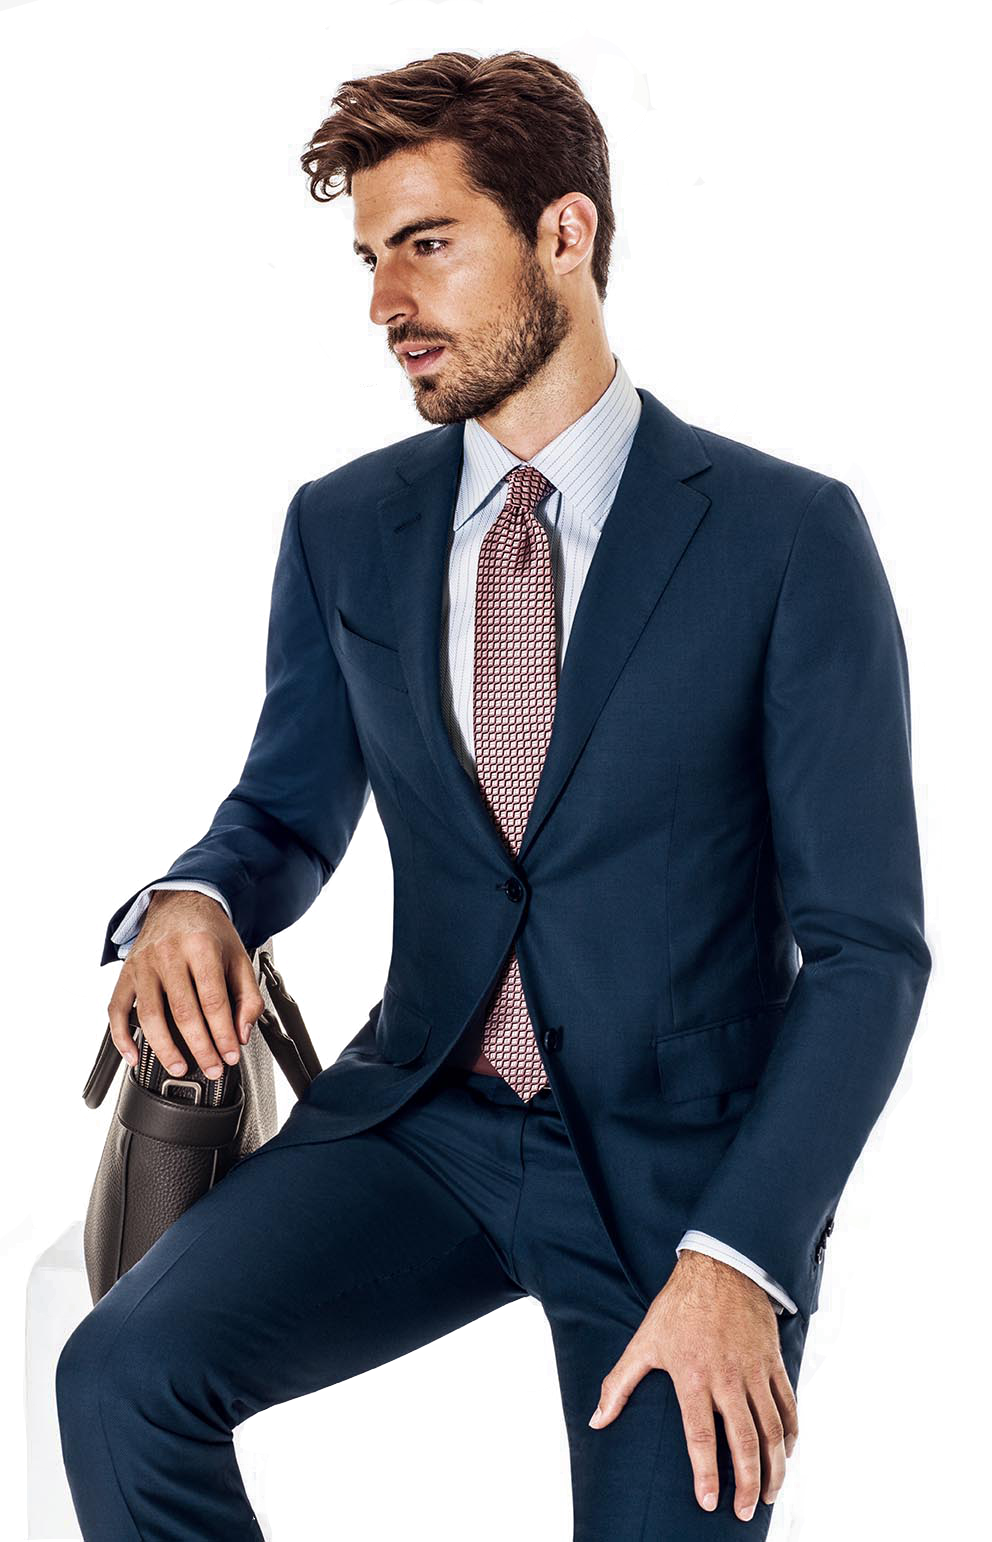 Attractive Model Man PNG Image HD